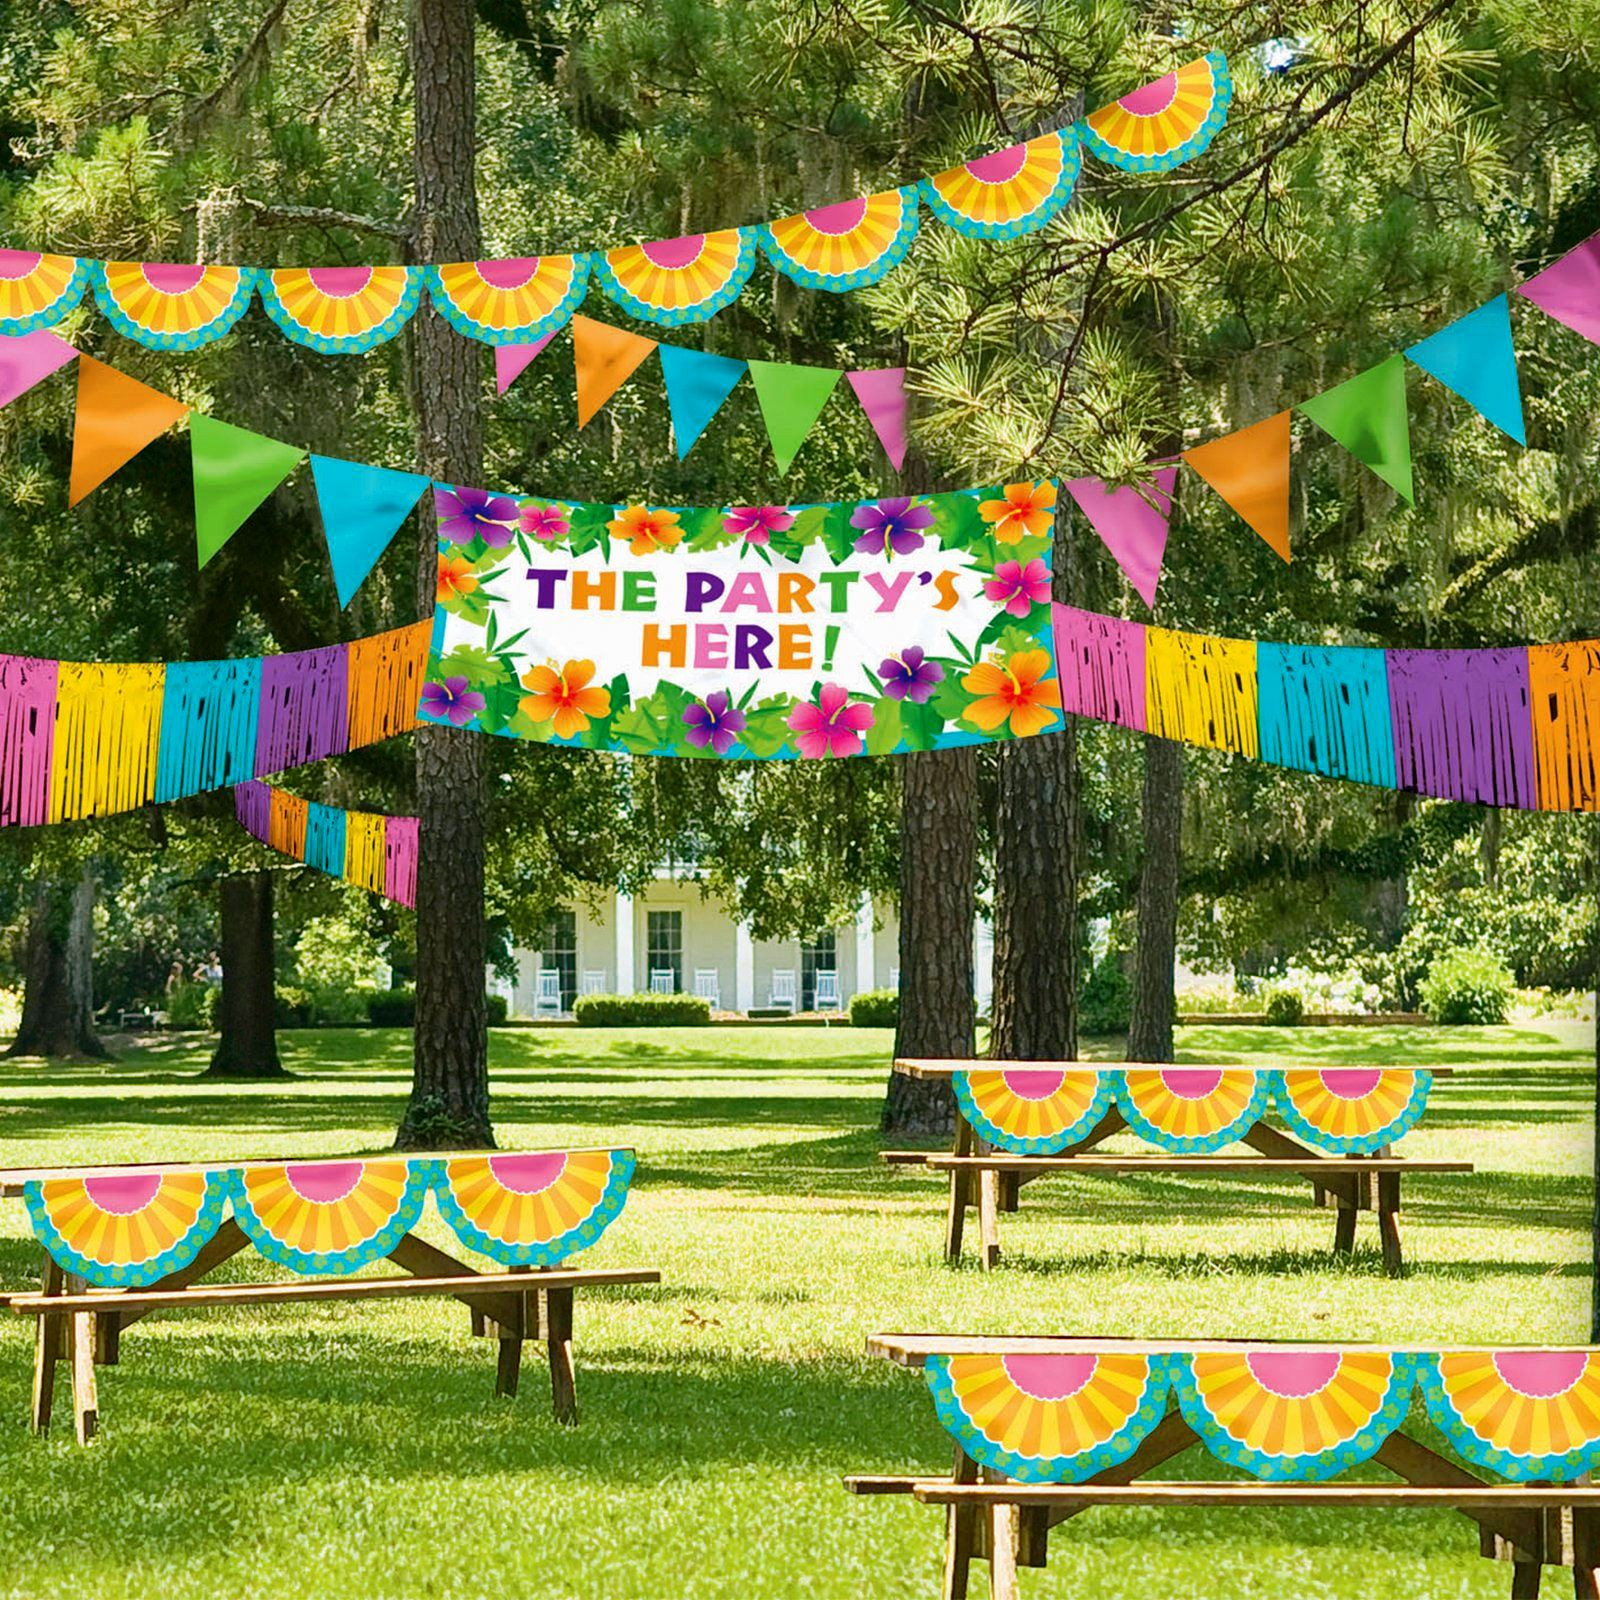 Outdoor Birthday Decorations
 Top 13 Outdoor Birthday Decorations Ideas For Your Next